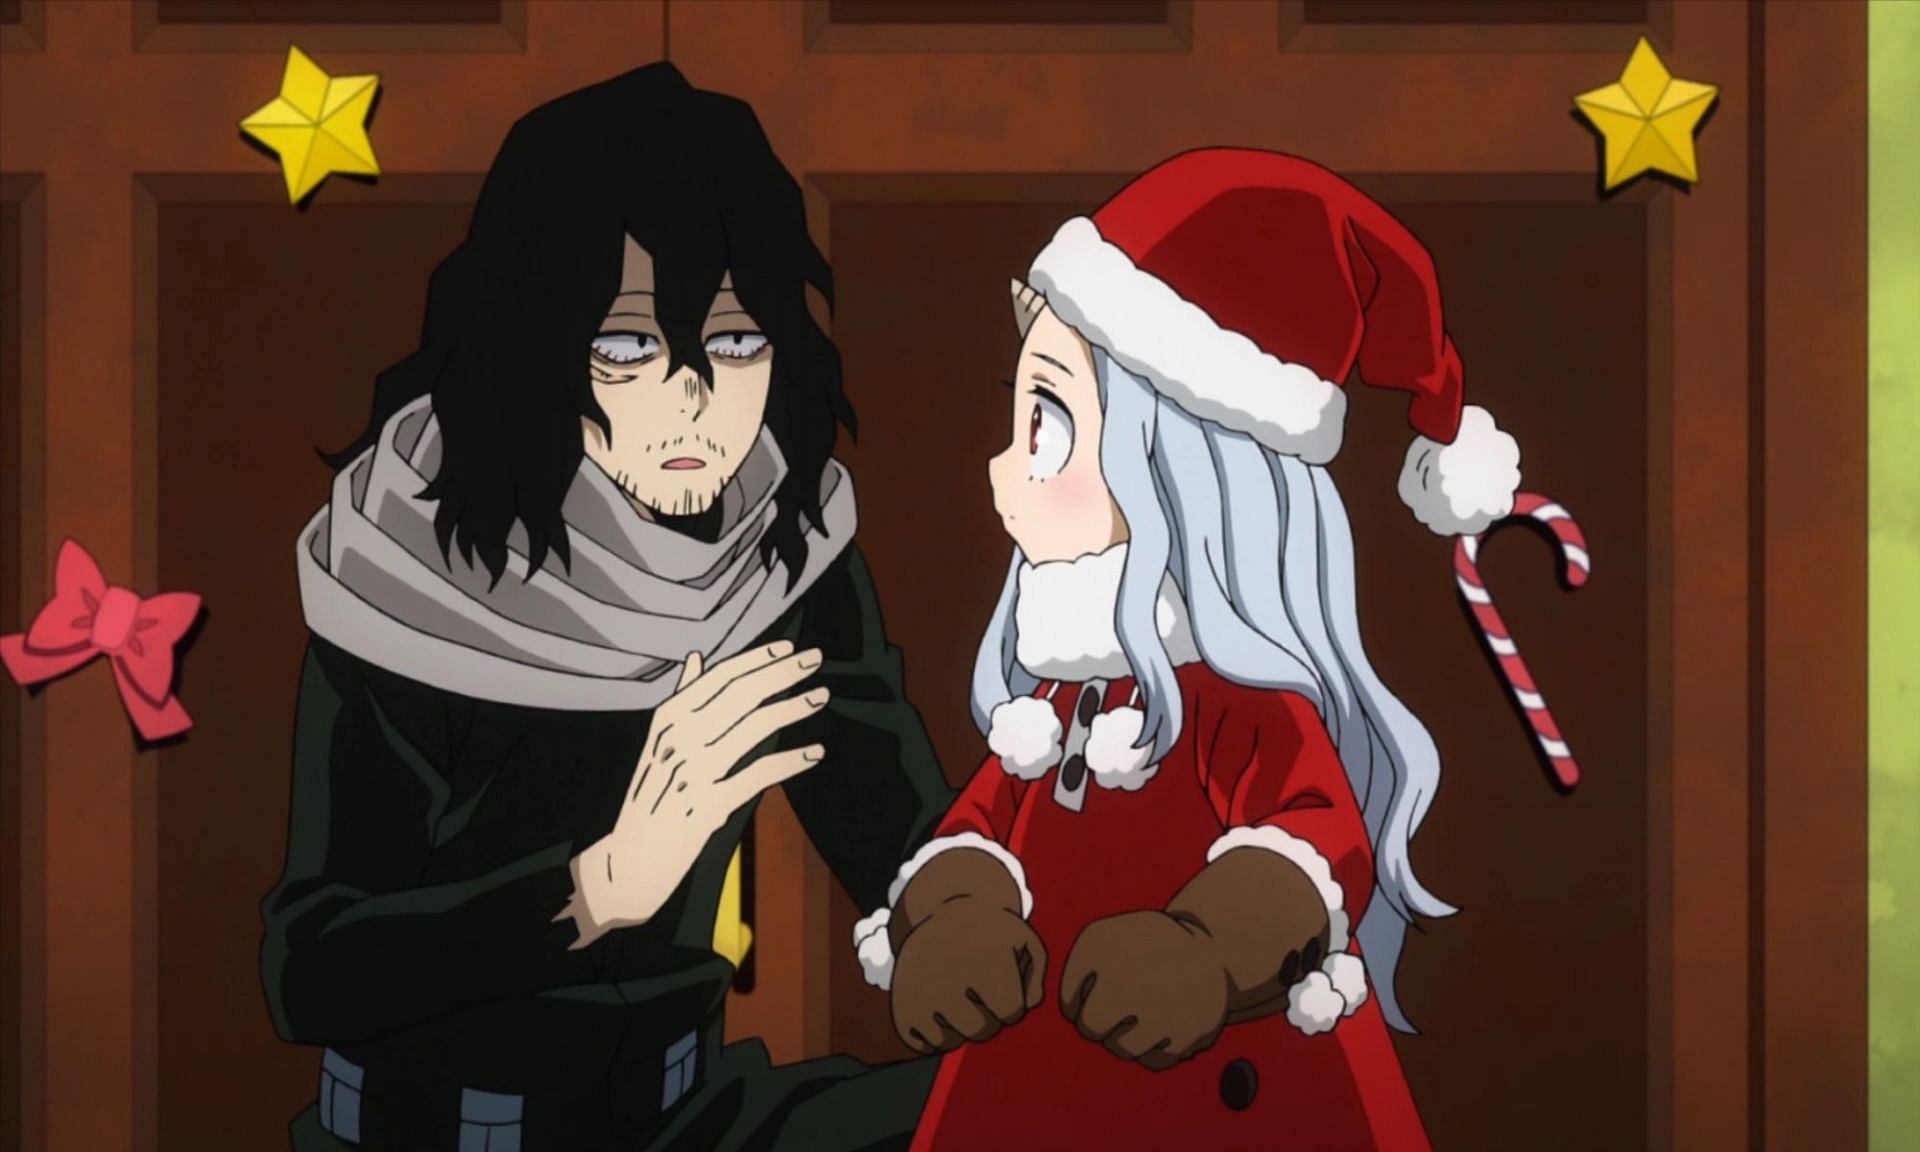 Aizawa is helping Eri learn to use her Quirk